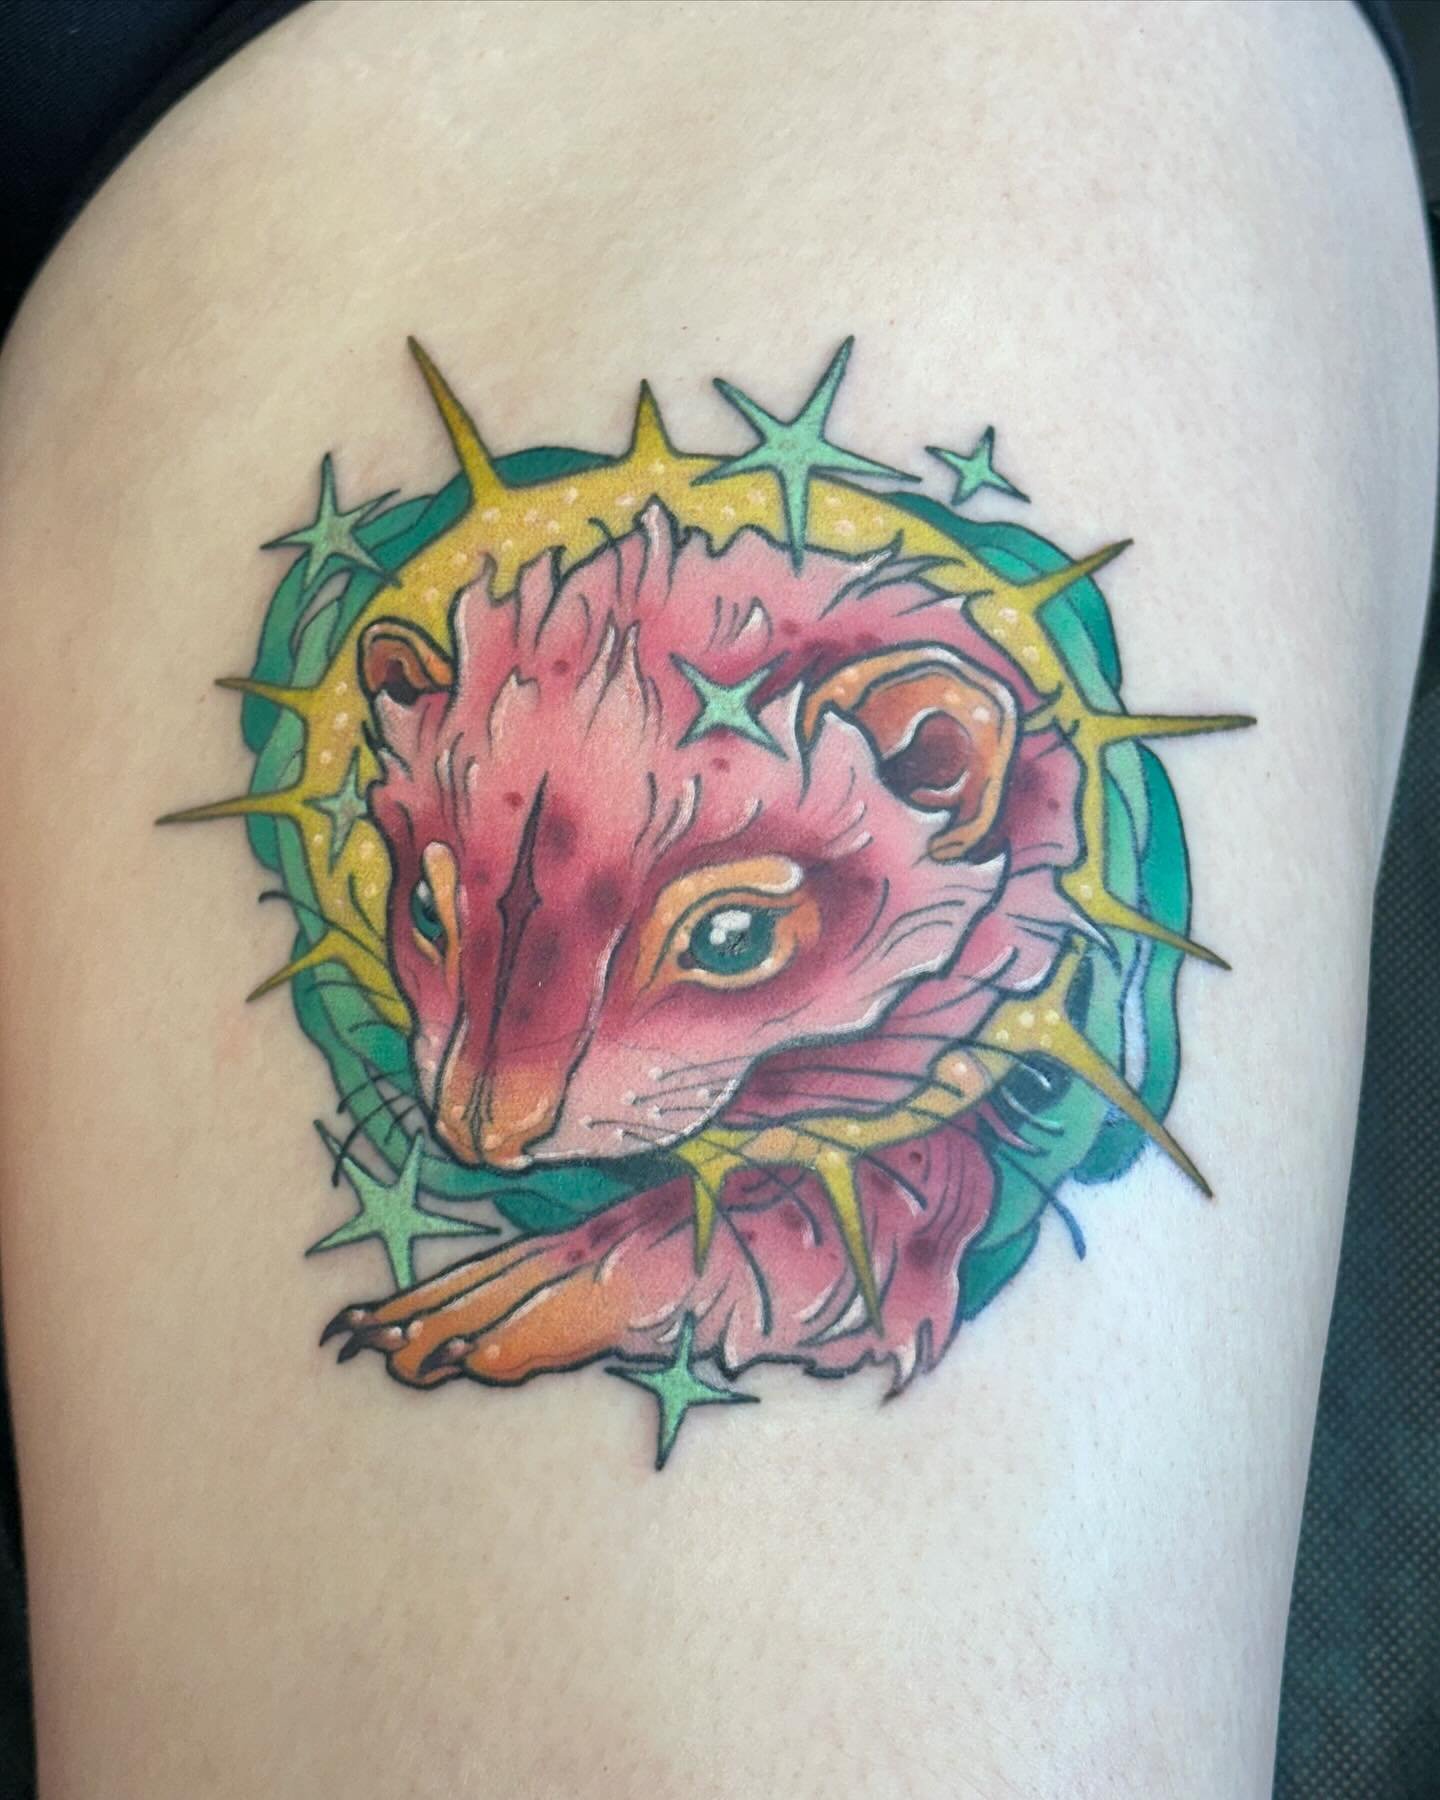 The sweetest ferret for Lauren, who is the best and has one of my earlier pieces as well! (Swipe to see a healed shot, we refreshed the color a while back but it was originally done in my first year of tattooing back in 2017 I believe!!)
Thanks for y